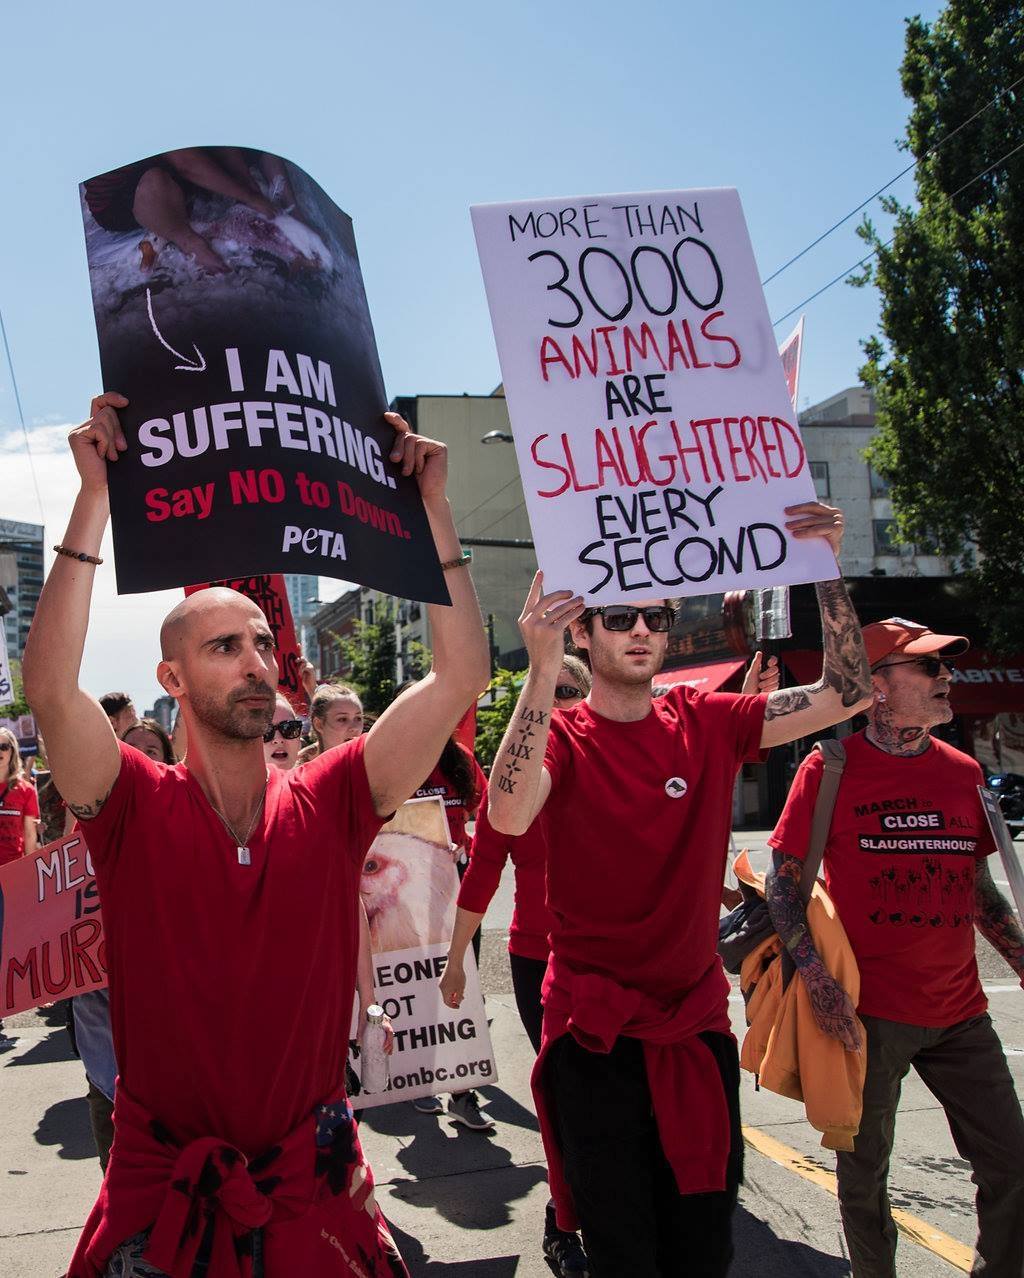 March to close down all slaughterhouses in St. Louis | March to close down  all slaughterhouses